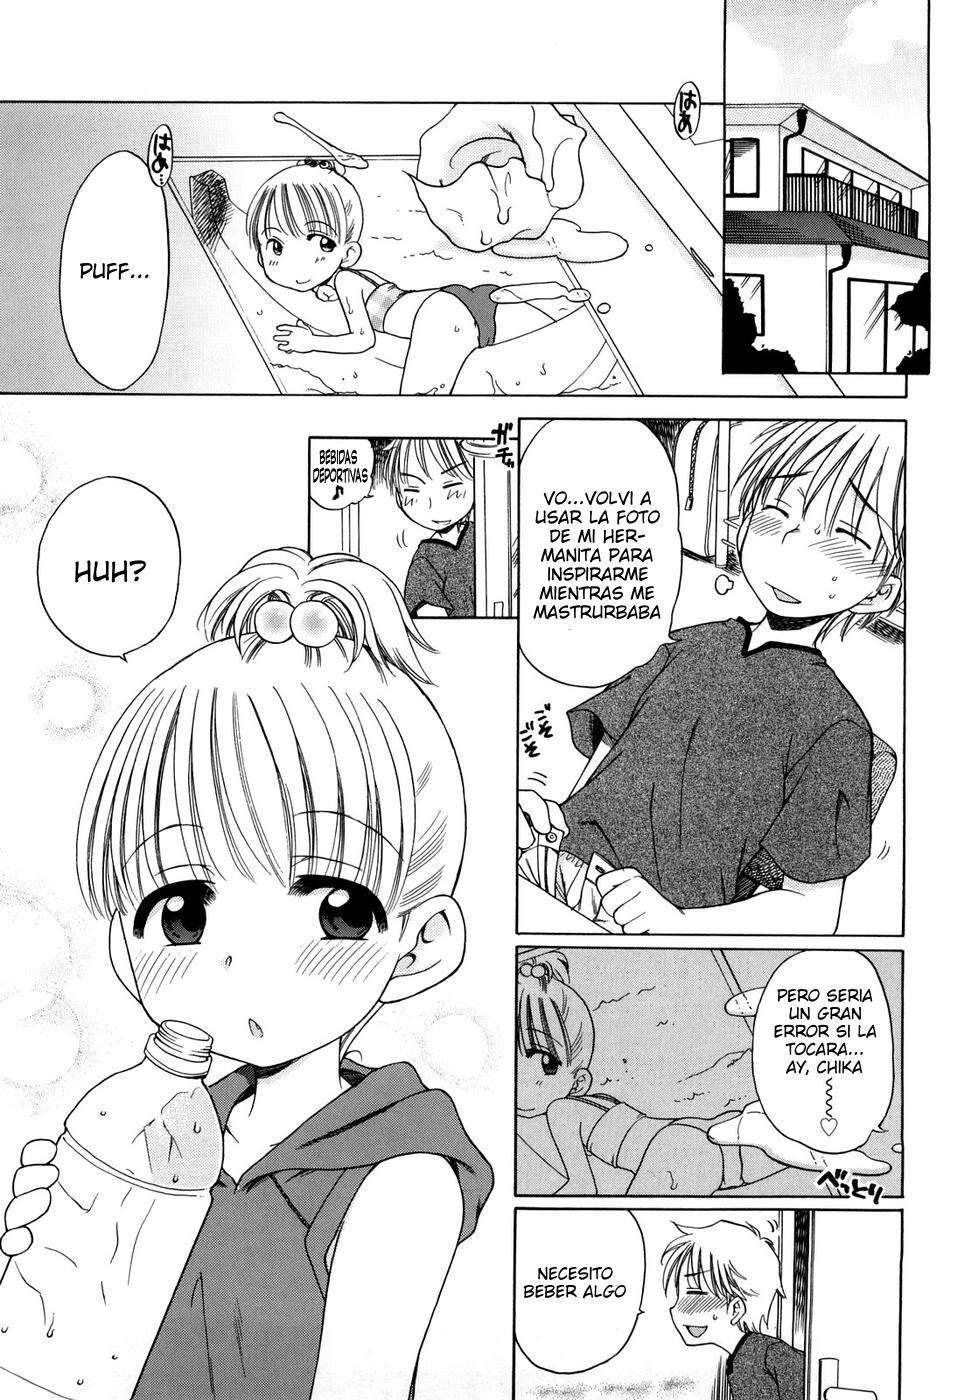 Onii-chan!! Me gustas.. Chapter-3 - 4